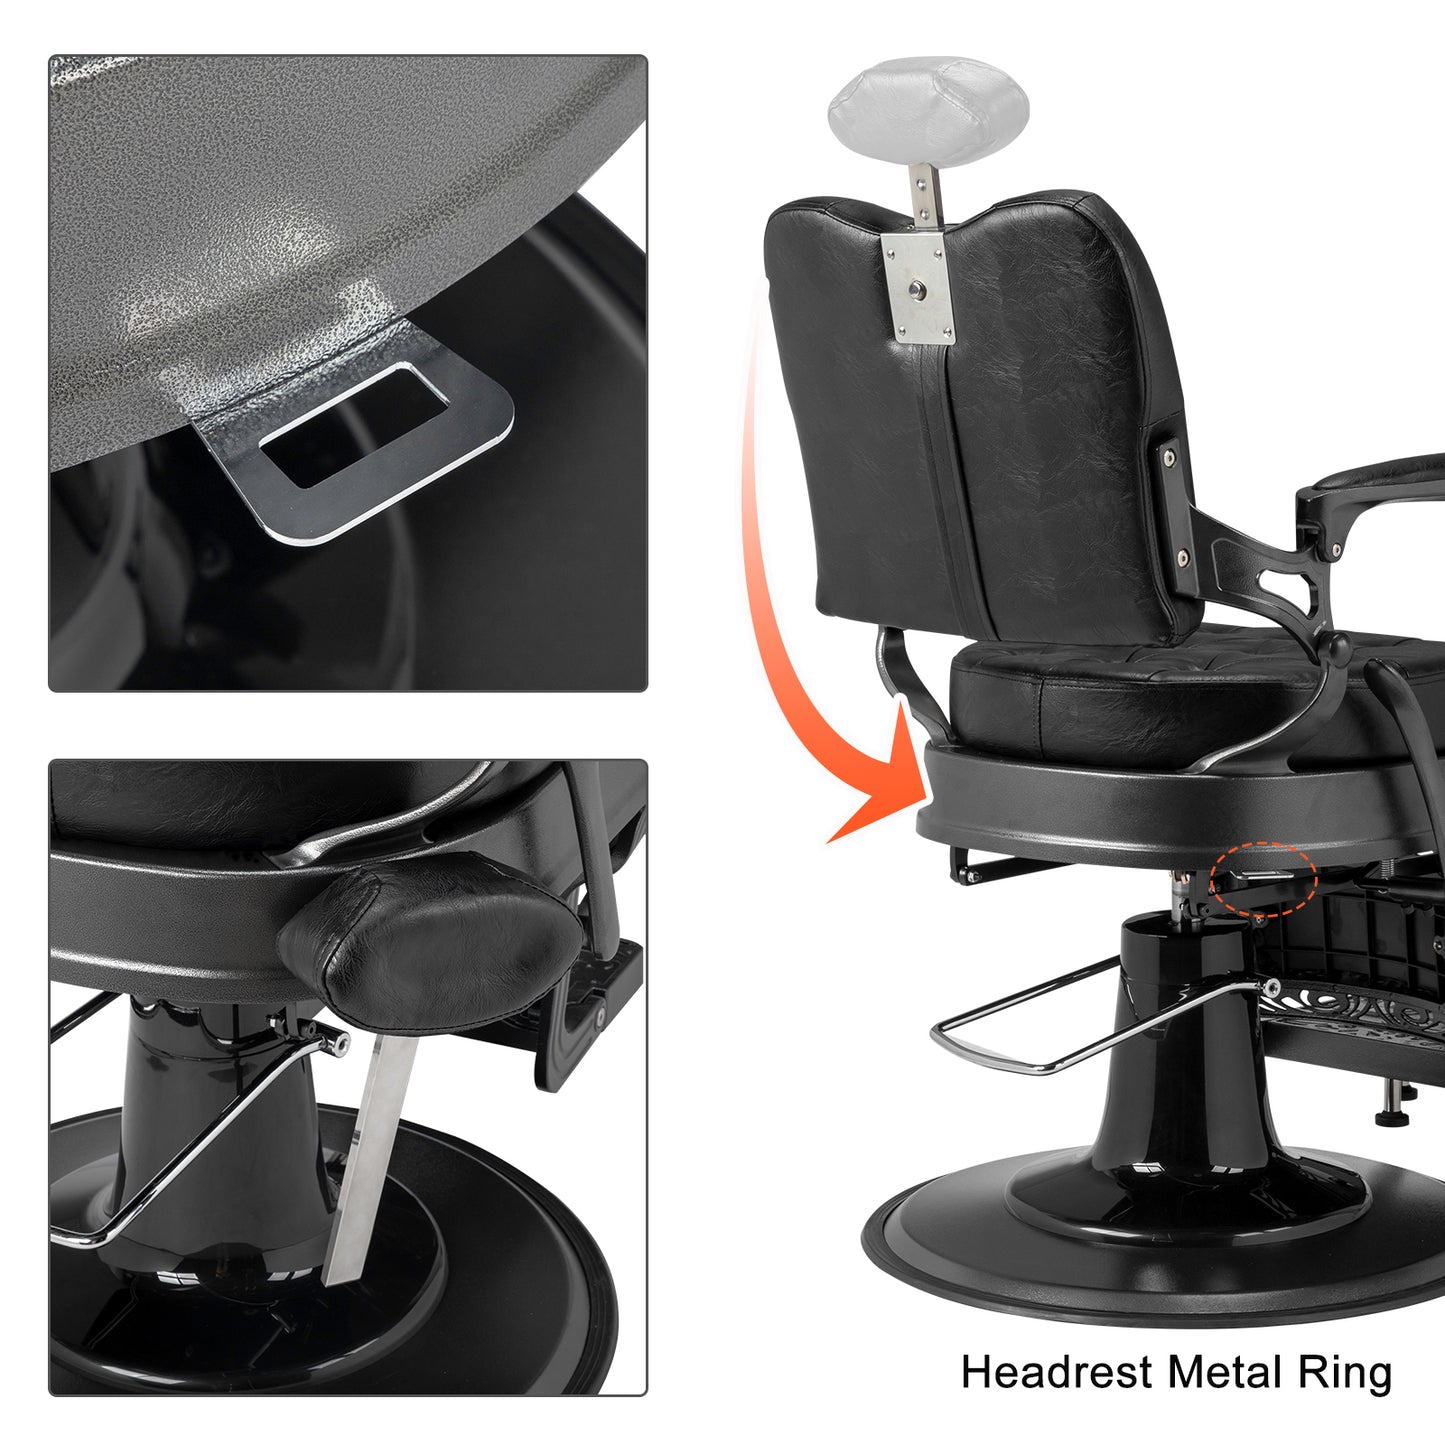 Heavy Duty Vintage Recline Barber Chair Hydraulic with Headrest, Supports up to 550lbs & 360°Rotatable, Professional Salon Beauty Spa Equipment